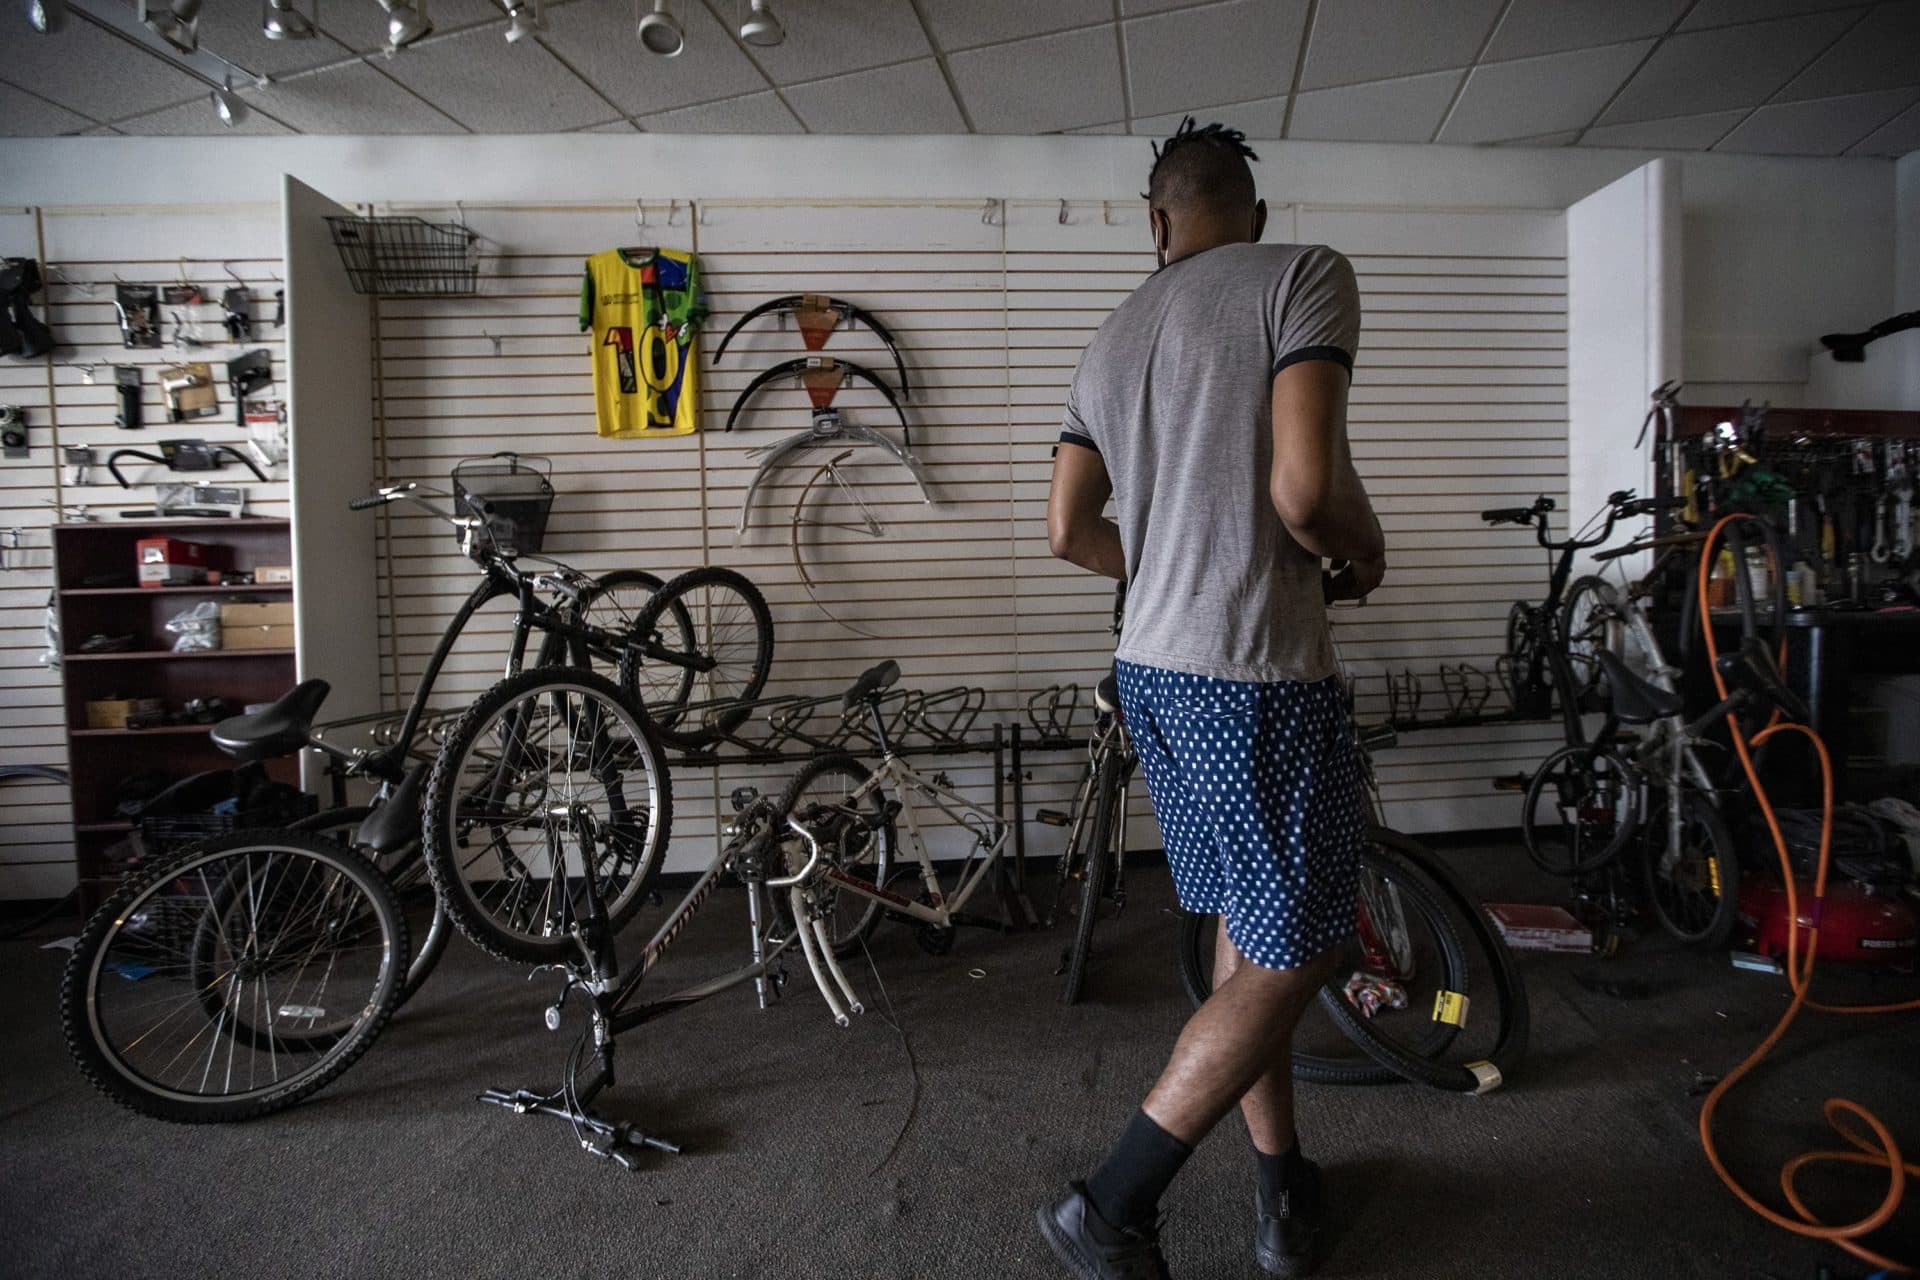 Noah Hicks walks past a group of bicycles that had parts removed by looters. (Jesse Costa/WBUR)